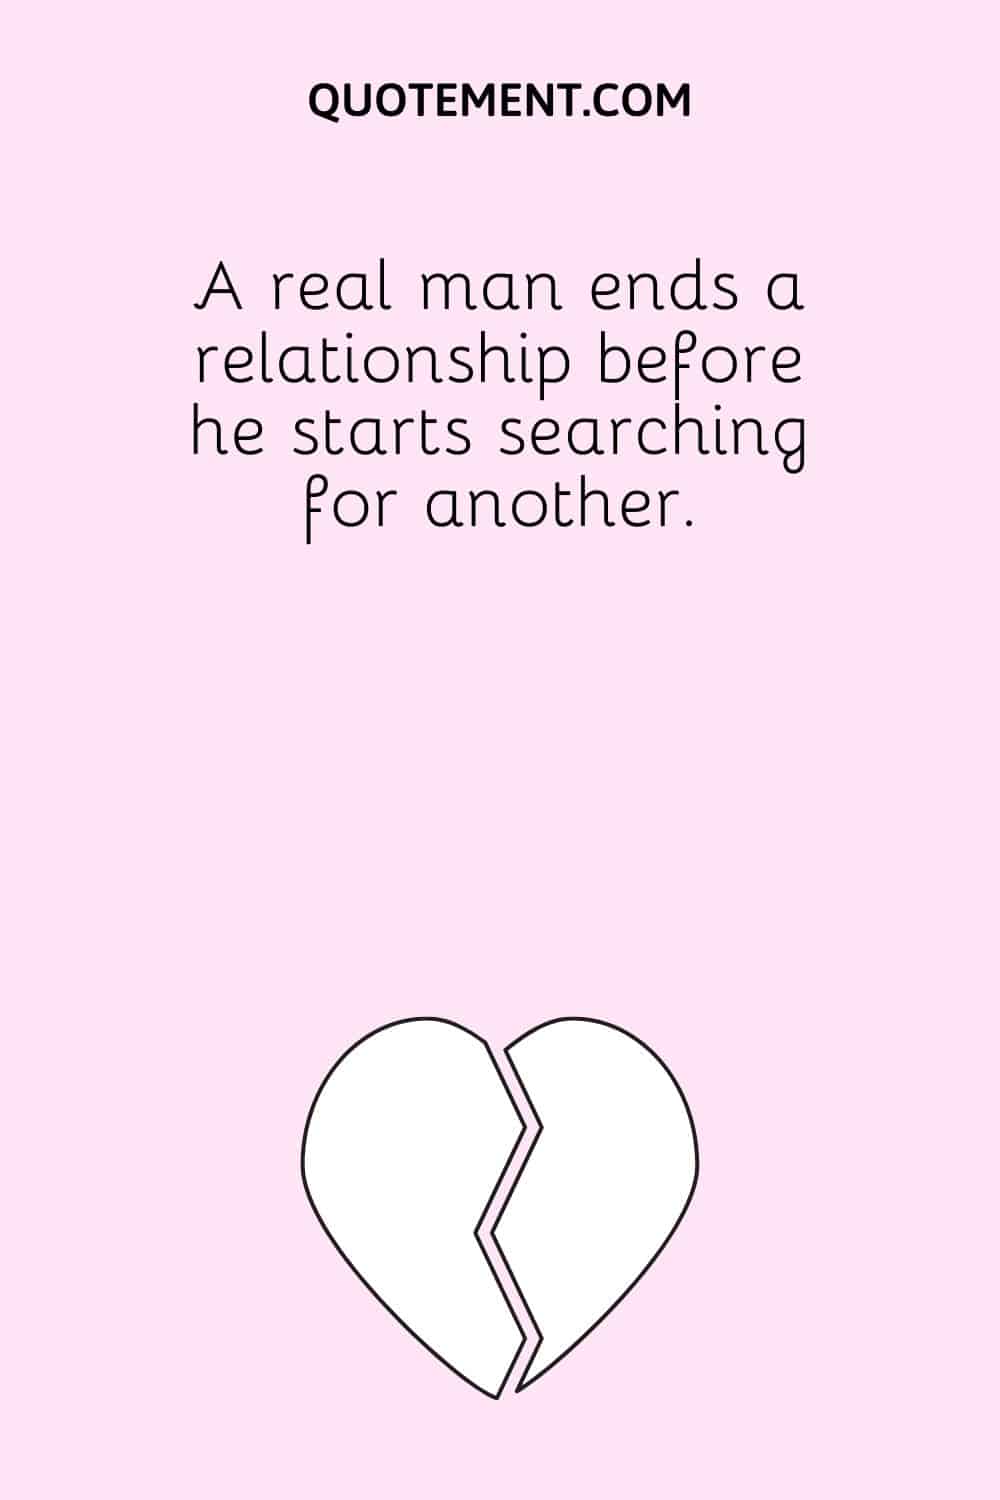 A real man ends a relationship before he starts searching for another.